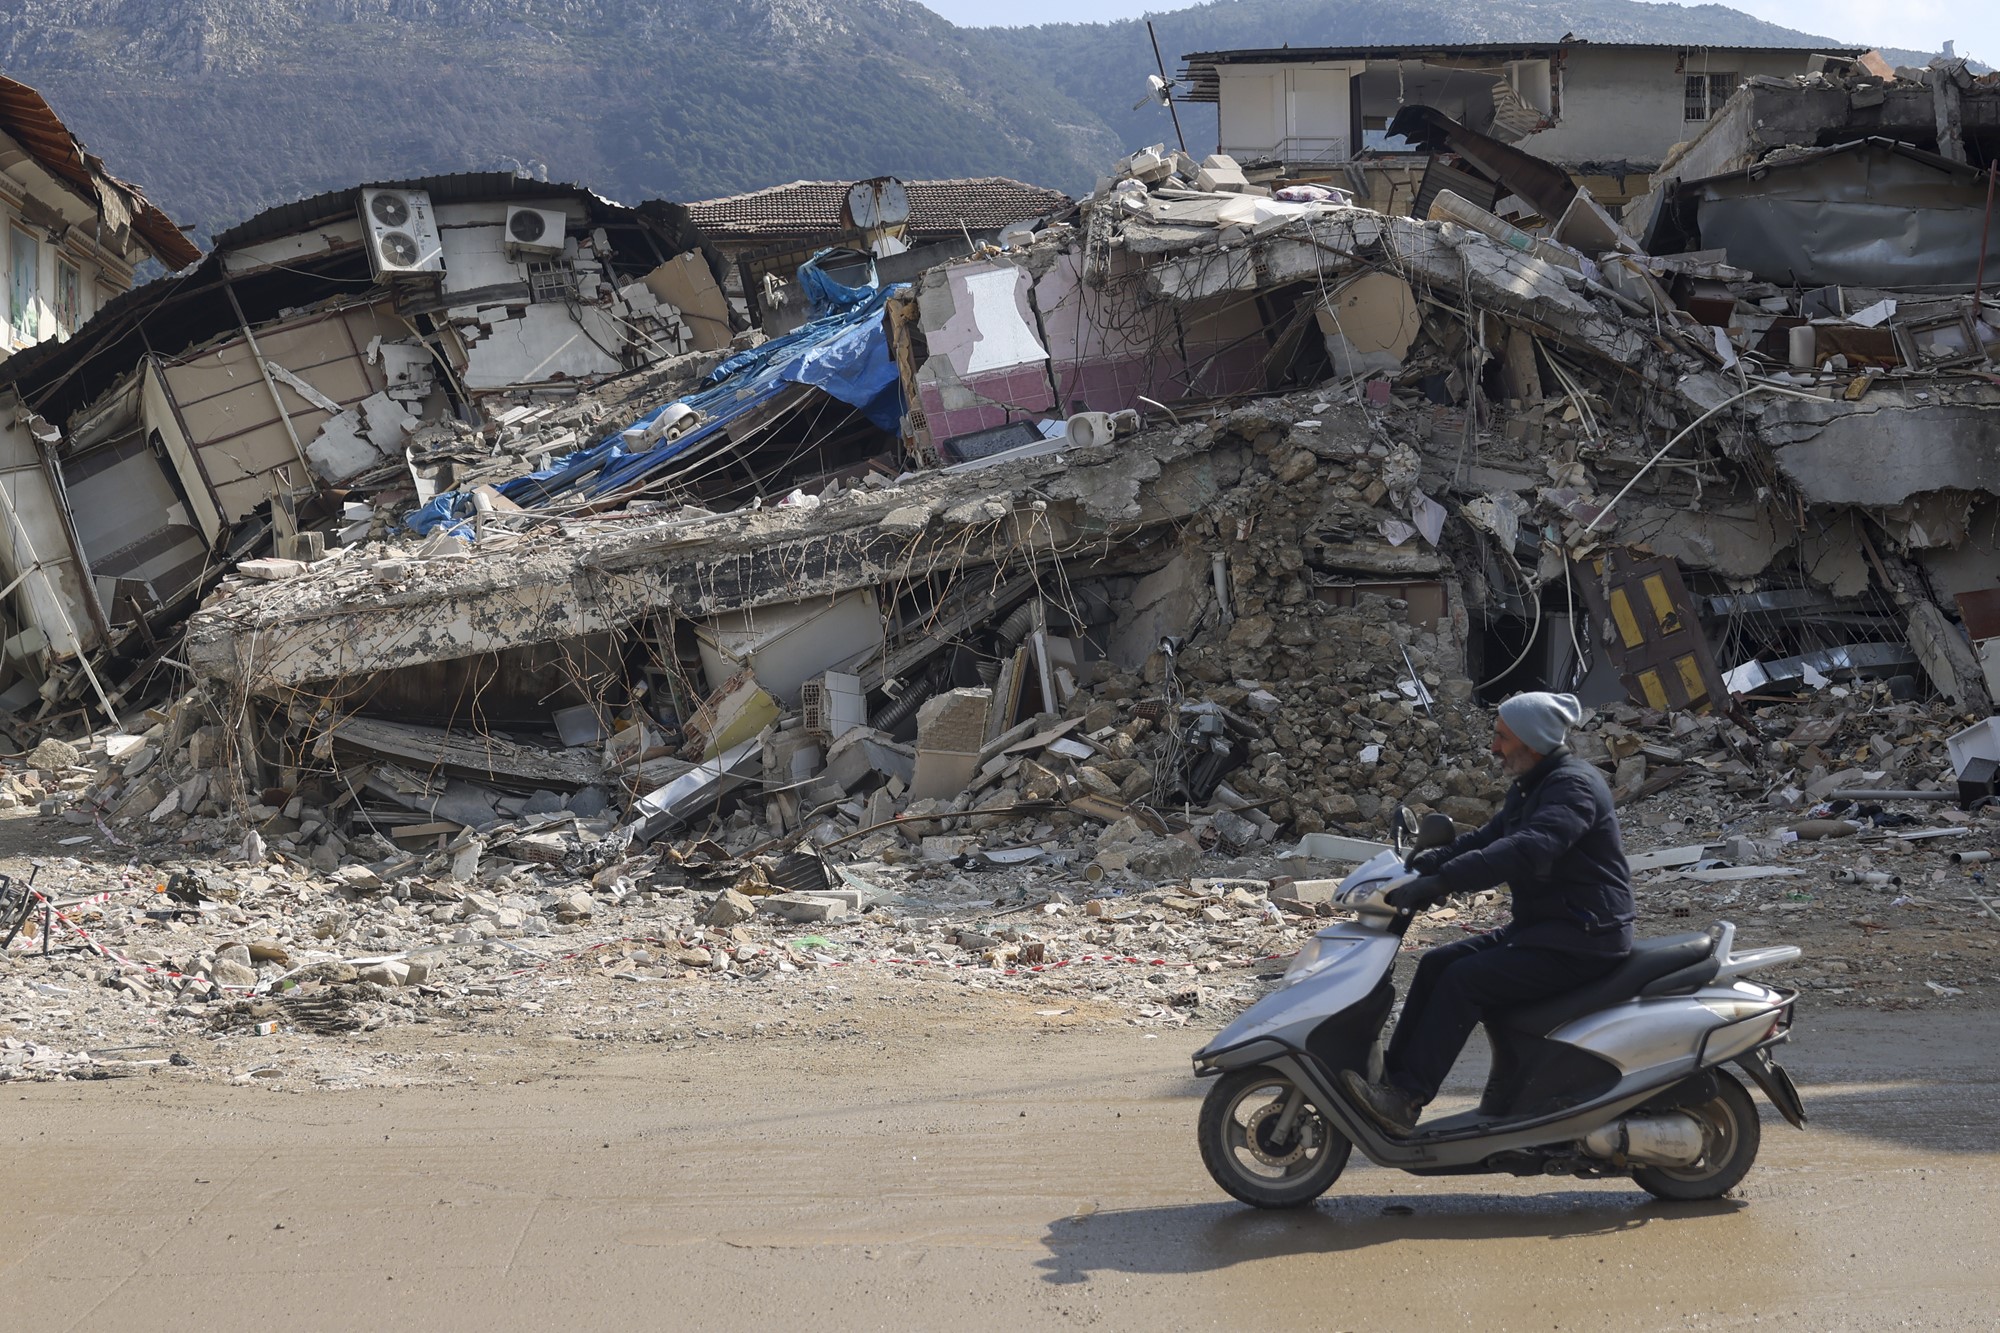 A man rides a moped past a destroyed building.